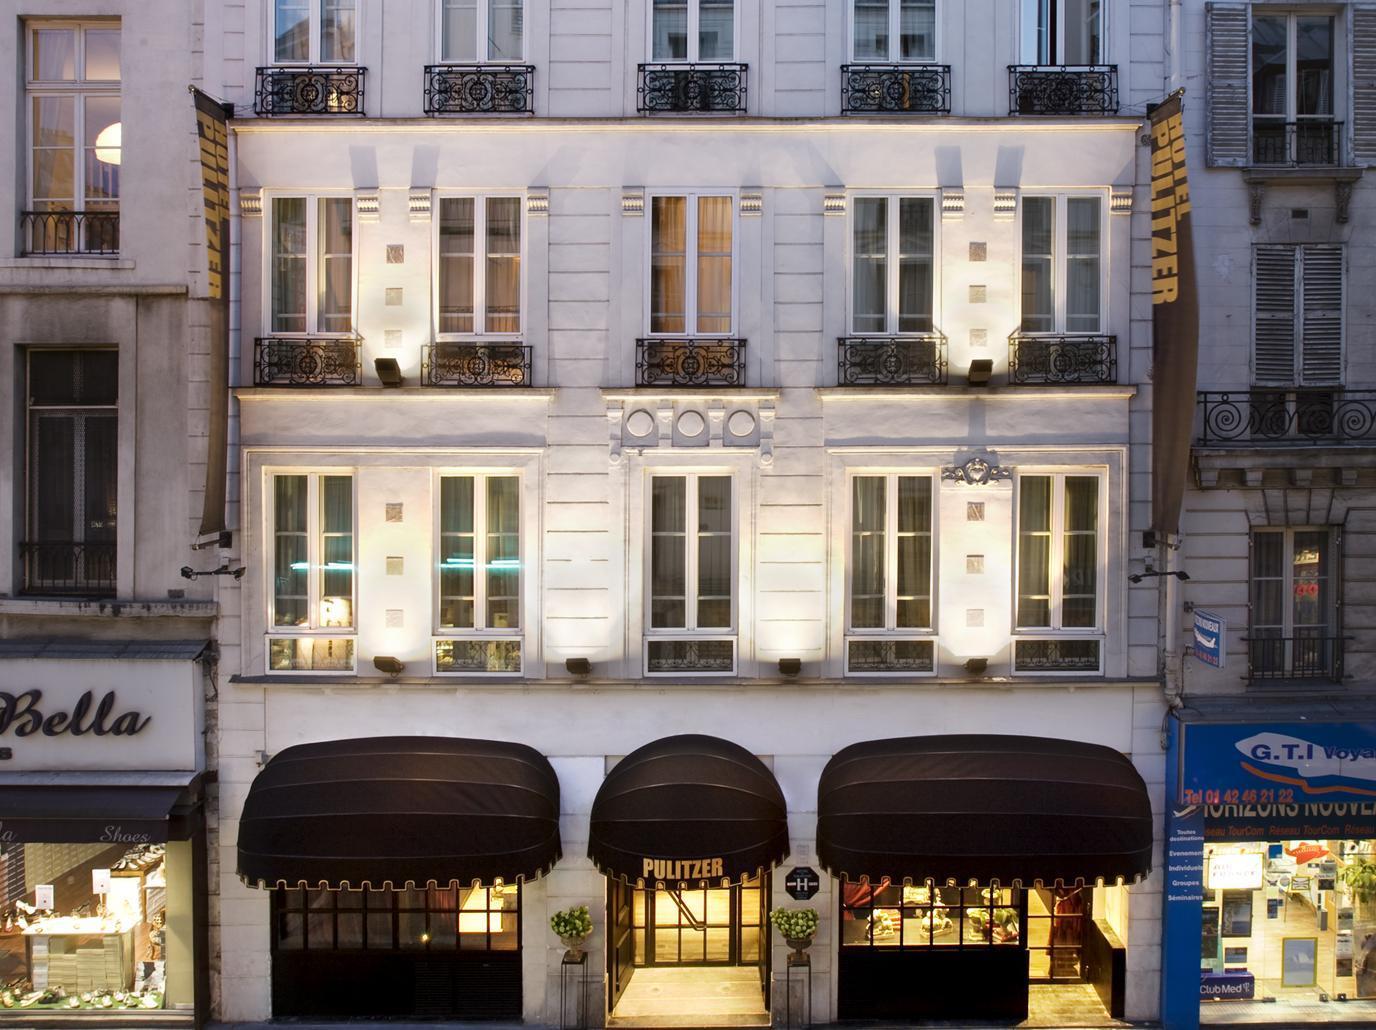 Hotel Pulitzer France FAQ 2016, What facilities are there in Hotel Pulitzer France 2016, What Languages Spoken are Supported in Hotel Pulitzer France 2016, Which payment cards are accepted in Hotel Pulitzer France , France Hotel Pulitzer room facilities and services Q&A 2016, France Hotel Pulitzer online booking services 2016, France Hotel Pulitzer address 2016, France Hotel Pulitzer telephone number 2016,France Hotel Pulitzer map 2016, France Hotel Pulitzer traffic guide 2016, how to go France Hotel Pulitzer, France Hotel Pulitzer booking online 2016, France Hotel Pulitzer room types 2016.